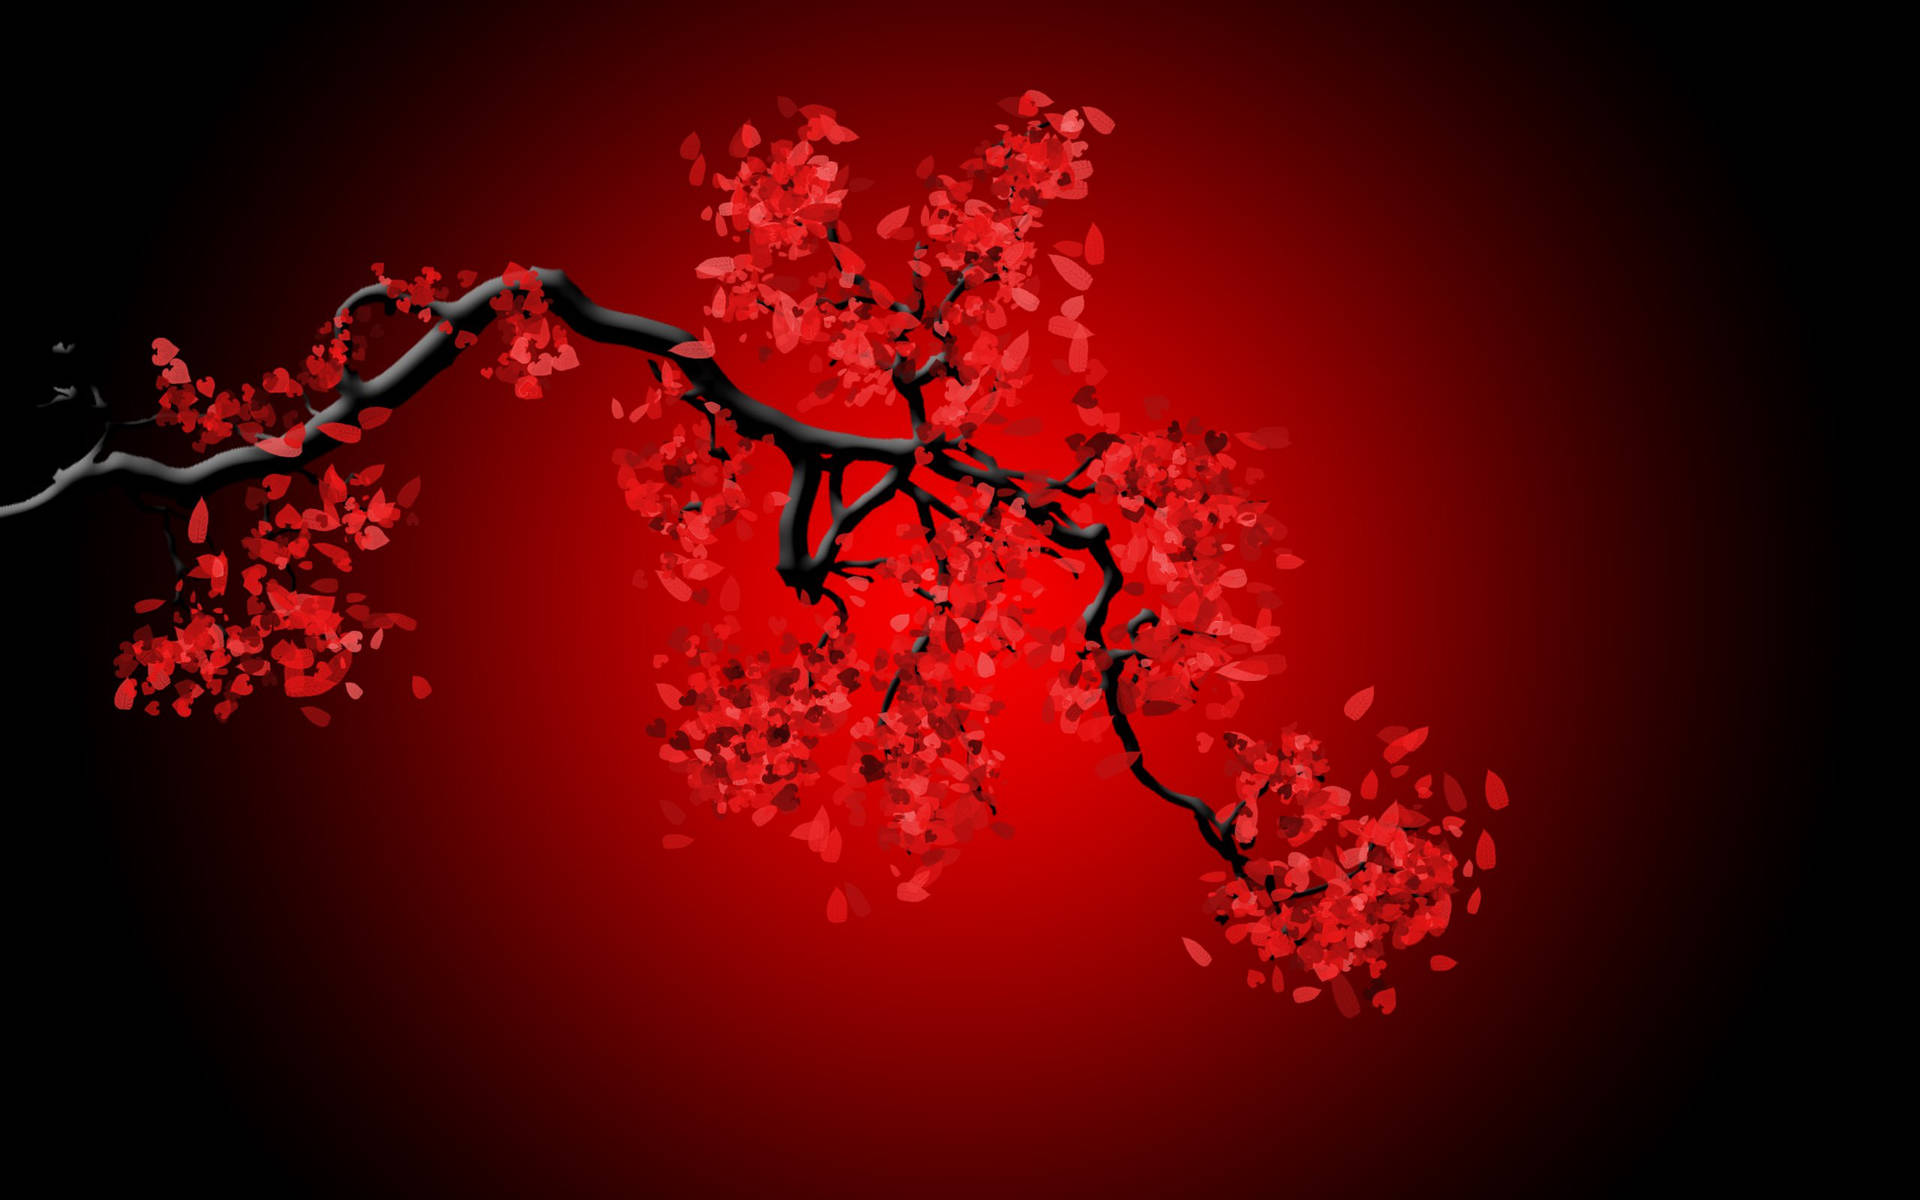 Black And Red Leaves On Branch Background